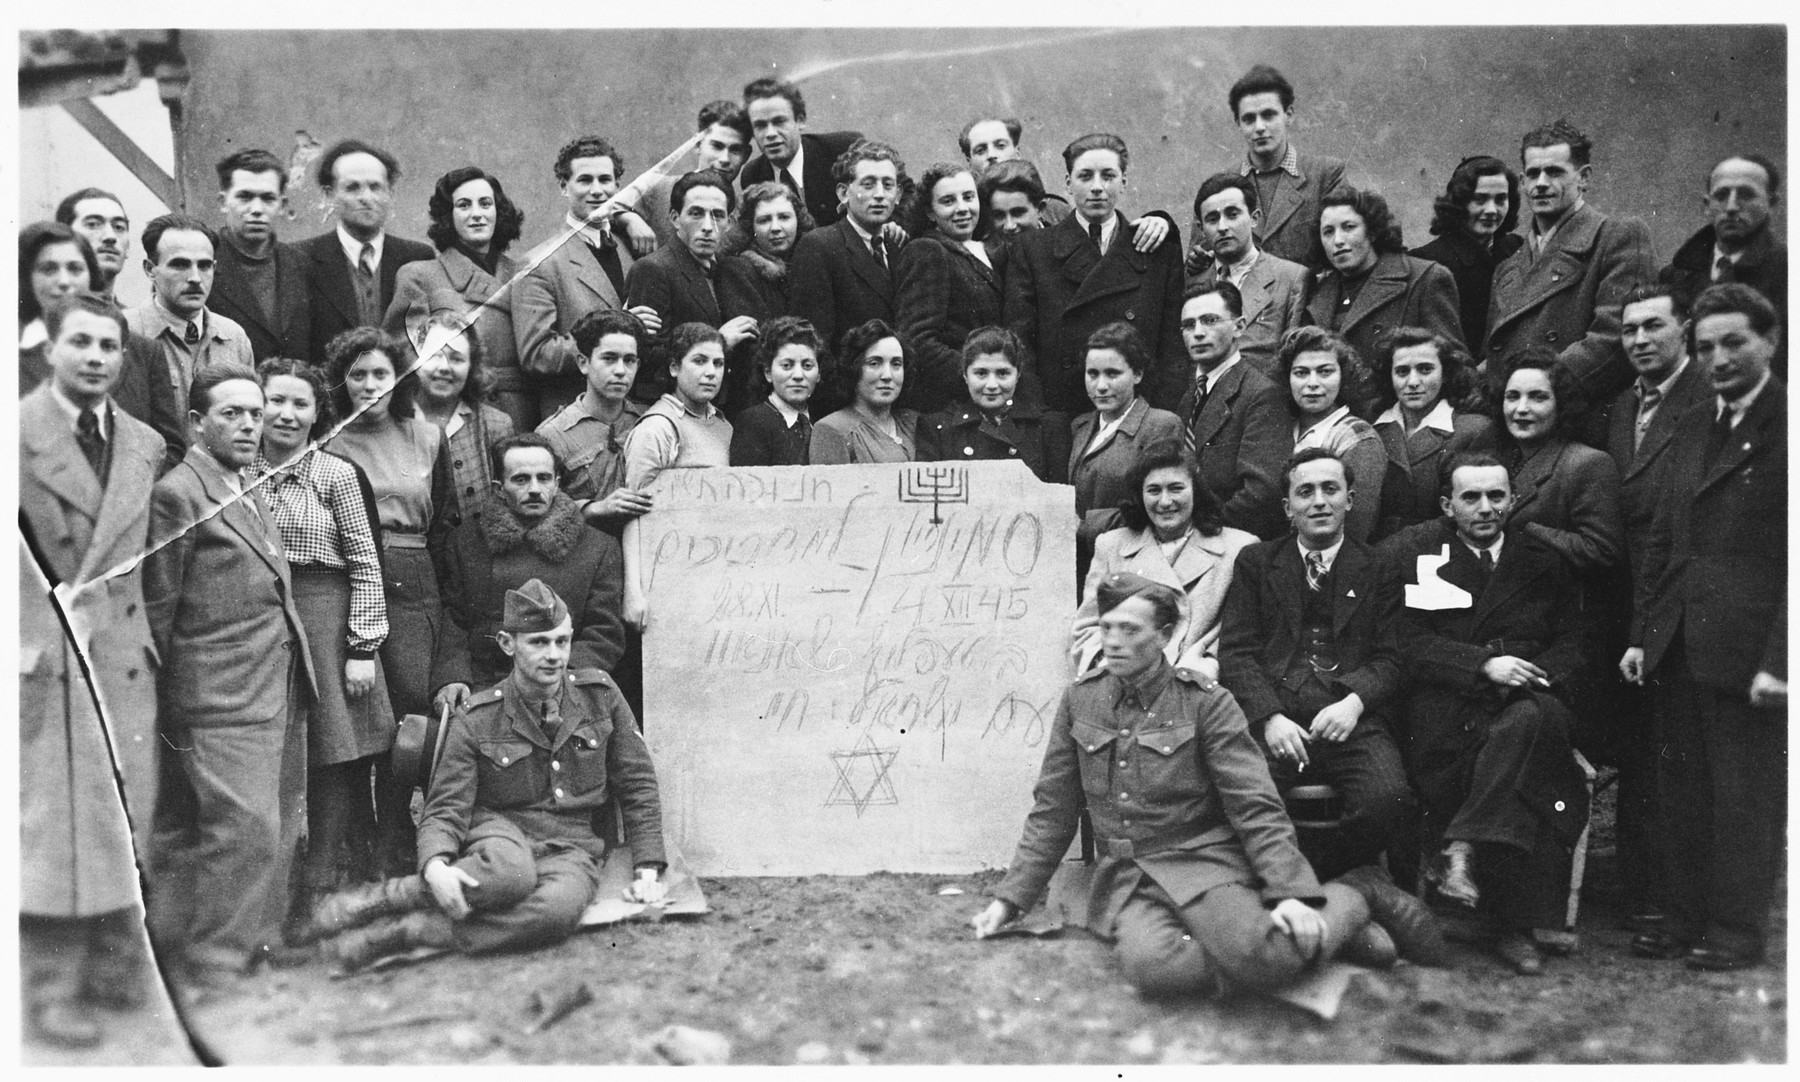 Group portrait of Jewish DP youth posing with a sign at a seminar of the Dror-Hehalutz Zionist youth movement in Czechoslovakia.

Among those pictured is Rahel Berger (second row from the front, fifth from the right).